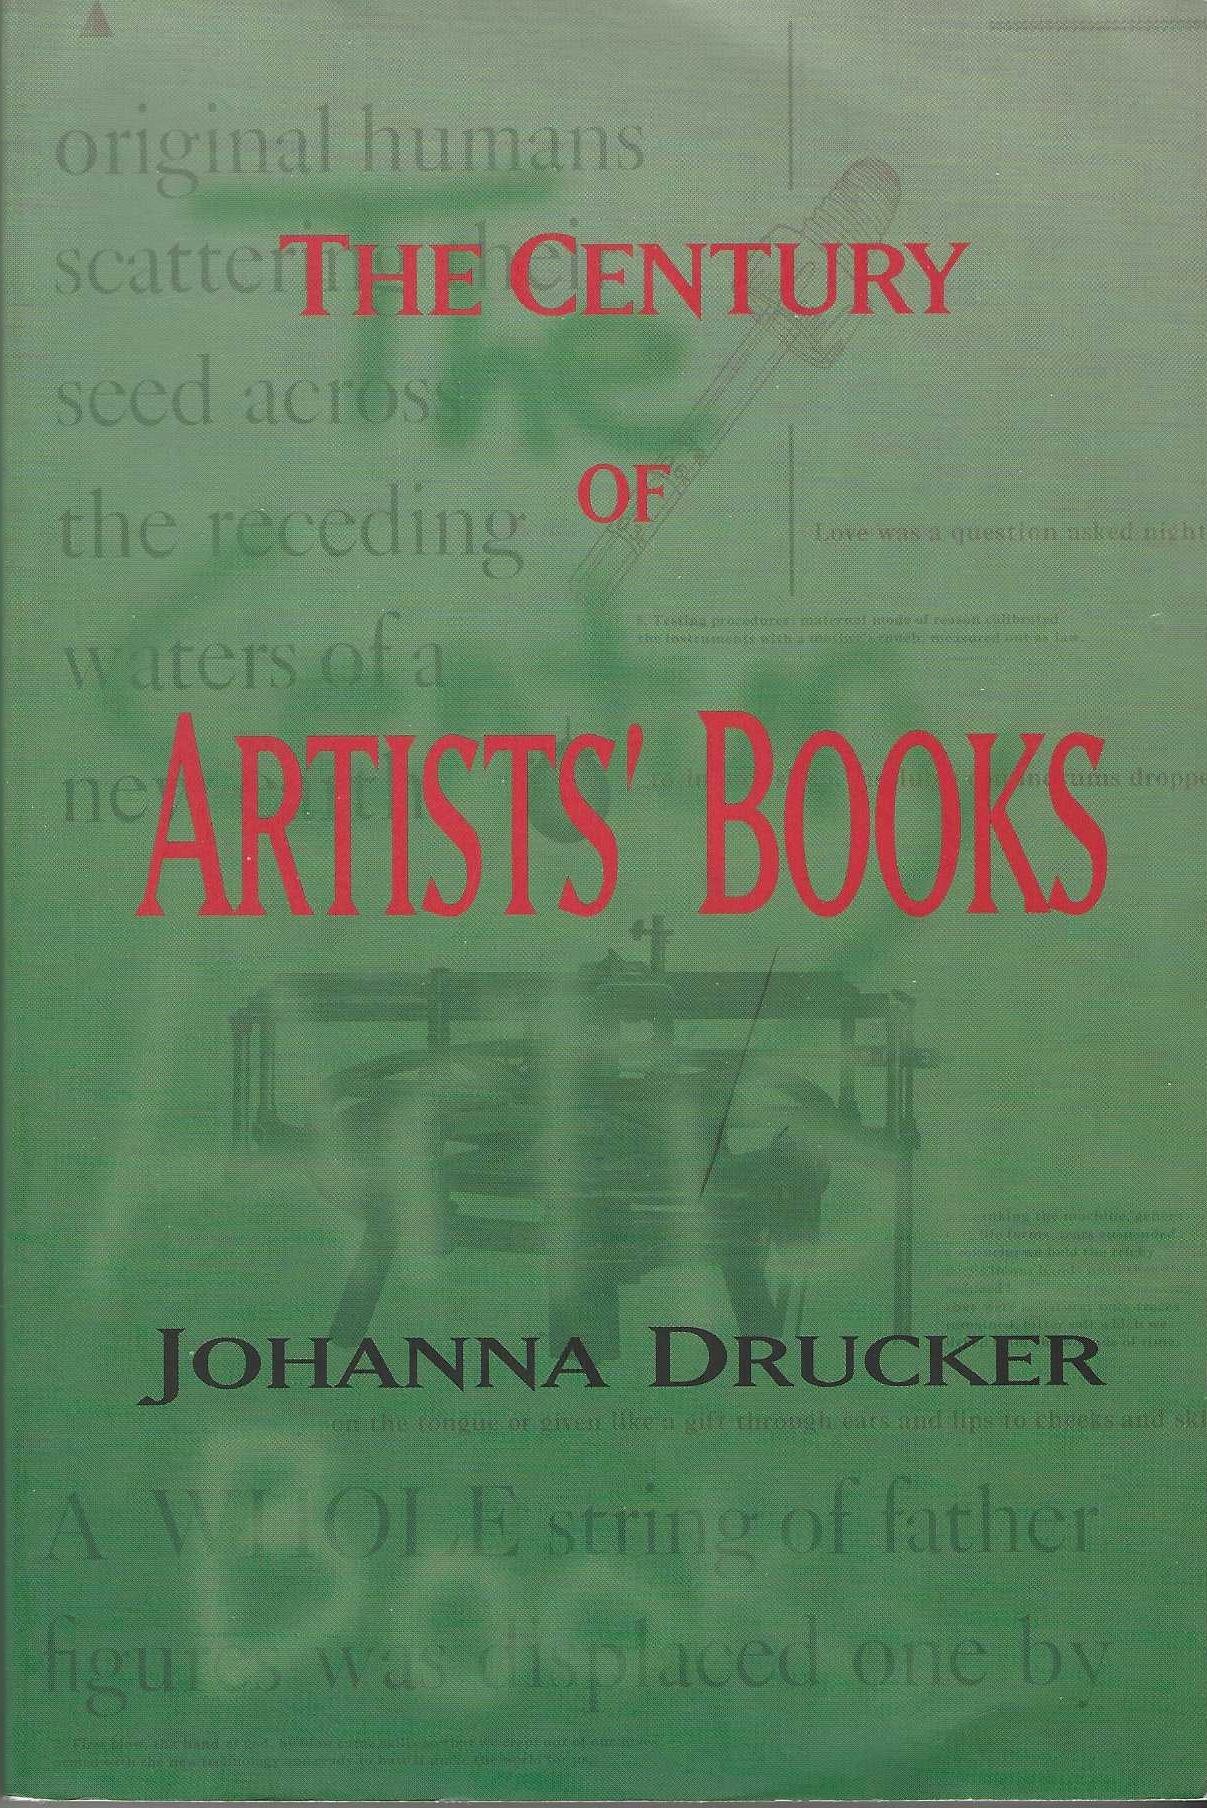 The Century of Artists' Book (1995) book cover